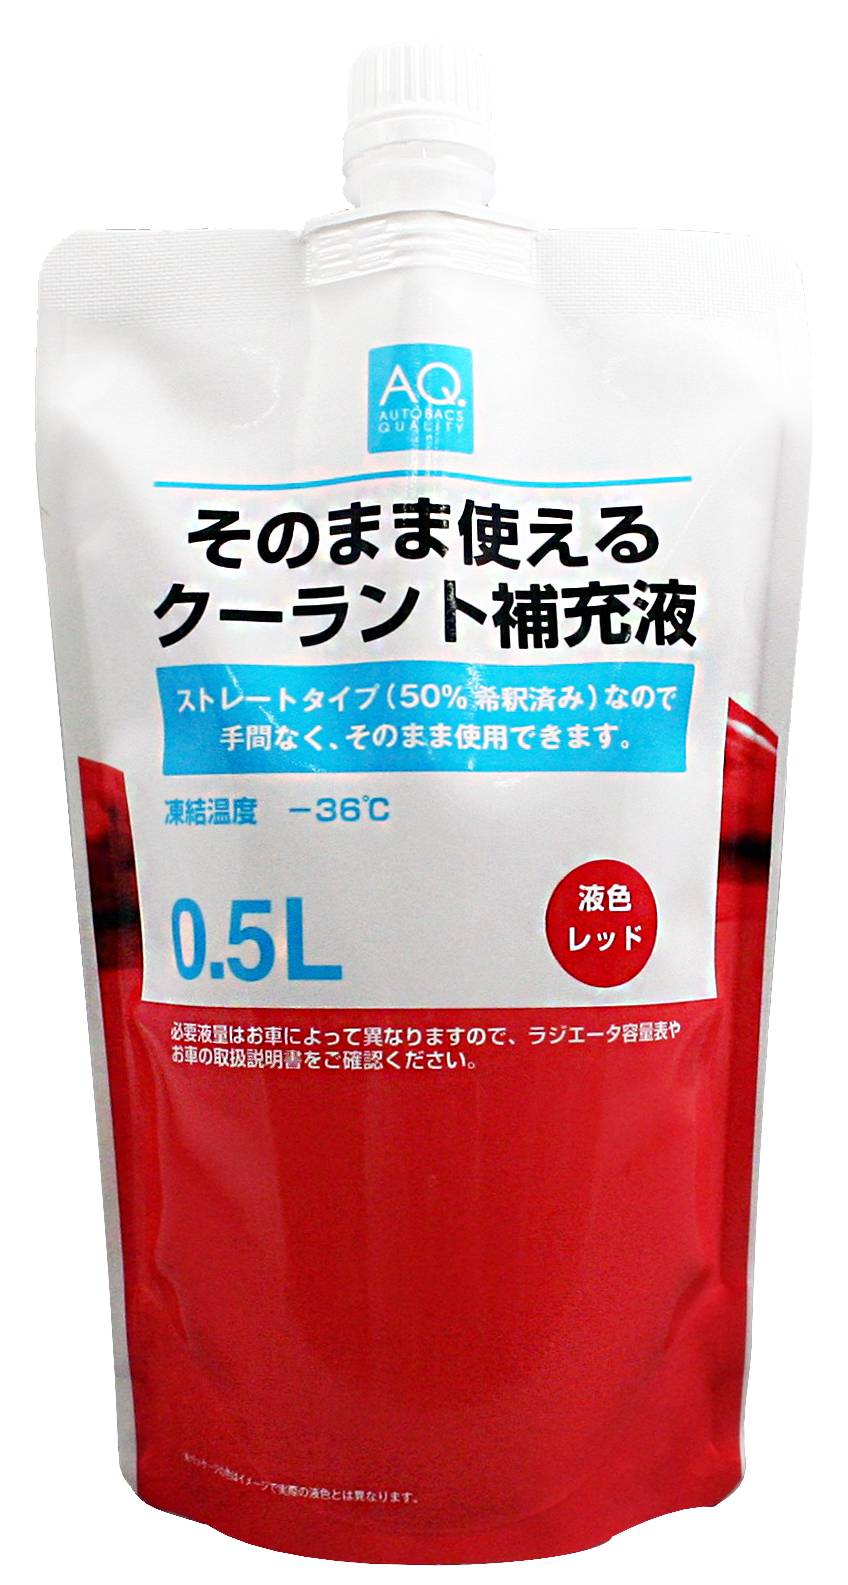 4971475241396-AQ.-Ready-to-use-coolant-replenisher-0.5L-red.jpg